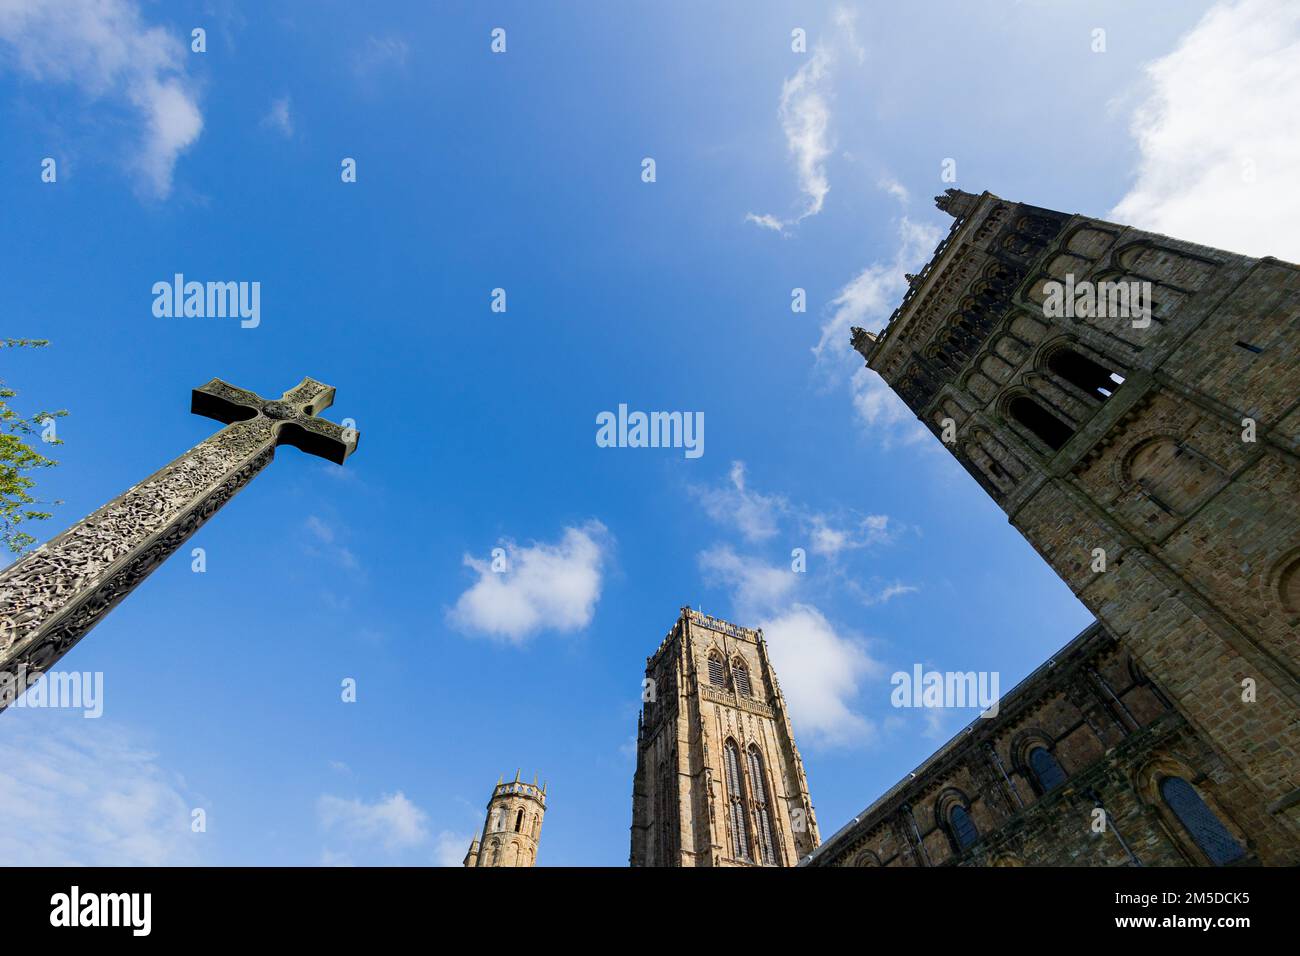 Durham England: 2022-06-07: Durham Cathedral exterior during sunny summer day. Wide angle view turrets and stained glass windows Stock Photo